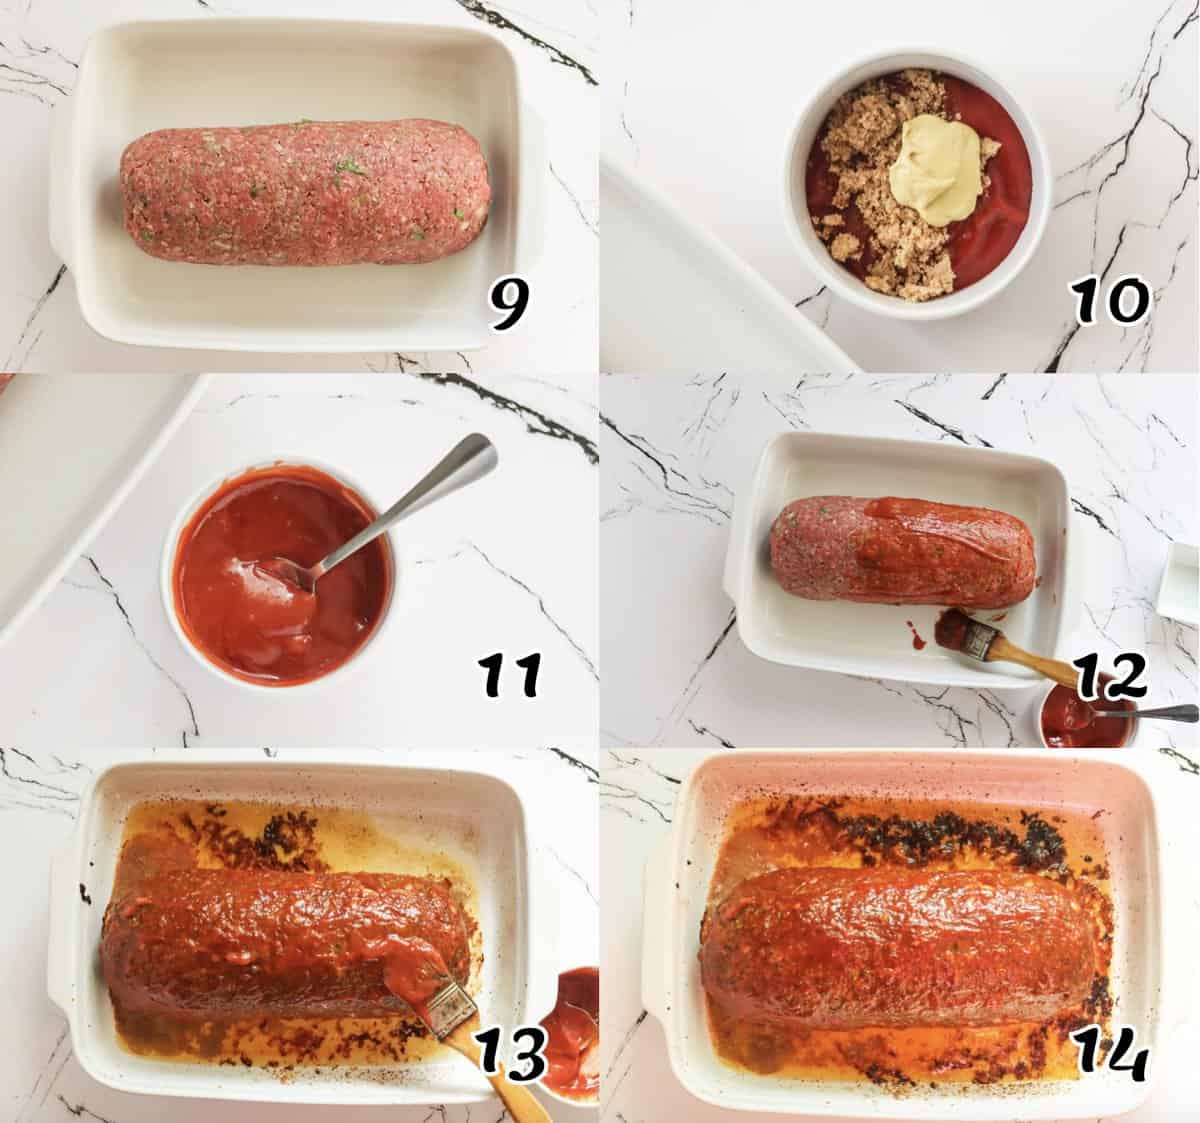 Glaze the meatloaf and bake it